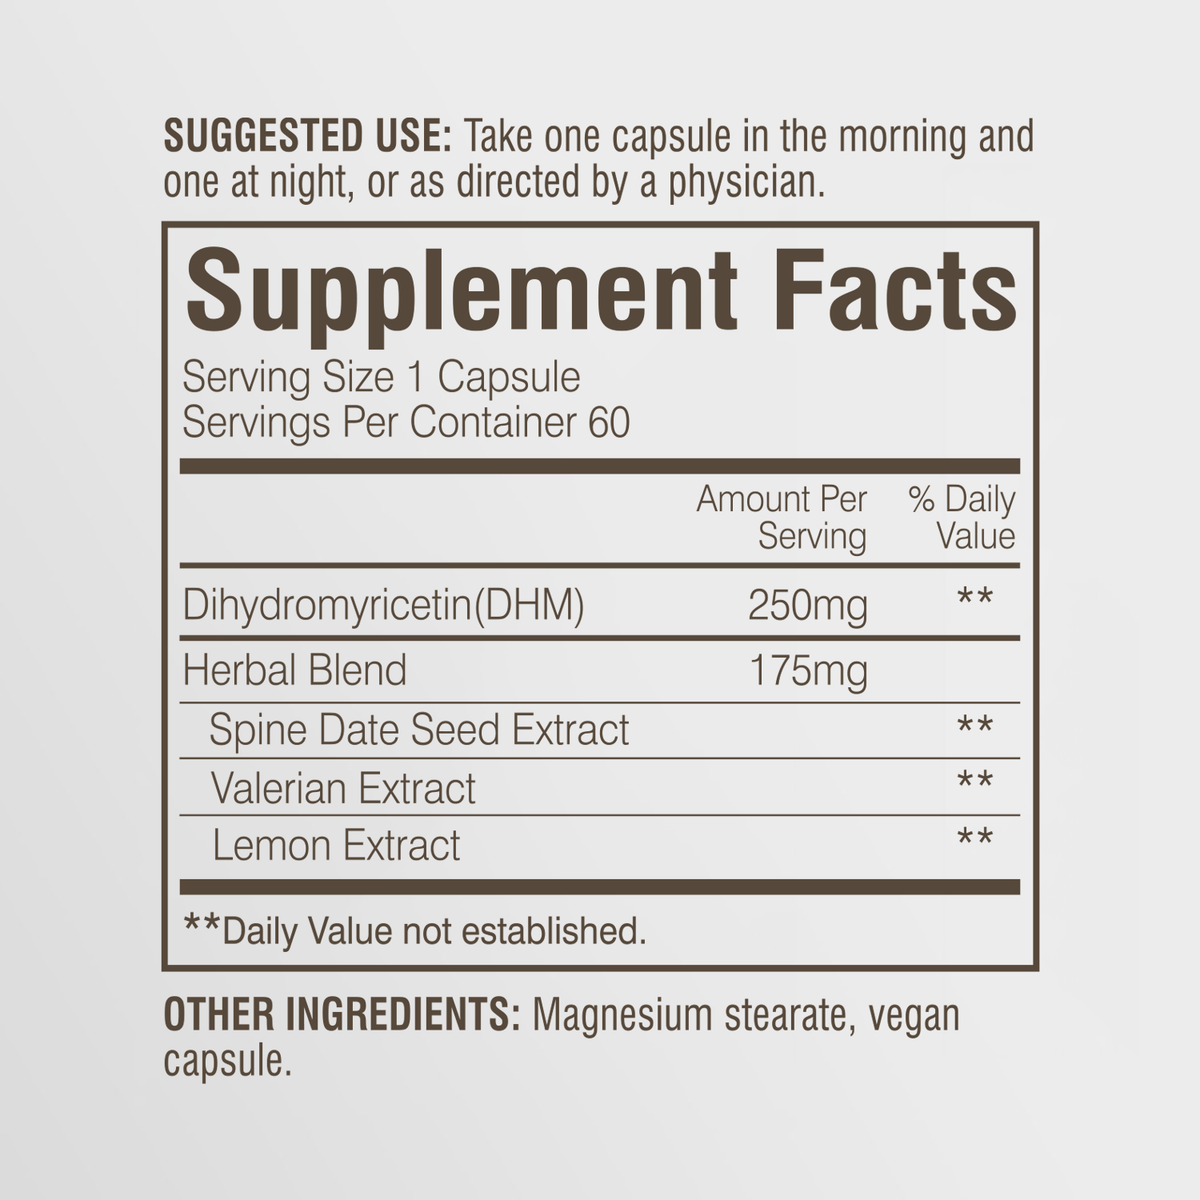 Supplement Facts. Suggested use: take one capsule in the morning and one at night, or as directed by a physician. Dihydromyricetin 250mg. Herbal blend of spine date seed extract, valerian extract, and lemon extract, 175mg. Other ingredients: magnesium stearate, vegan capsule.